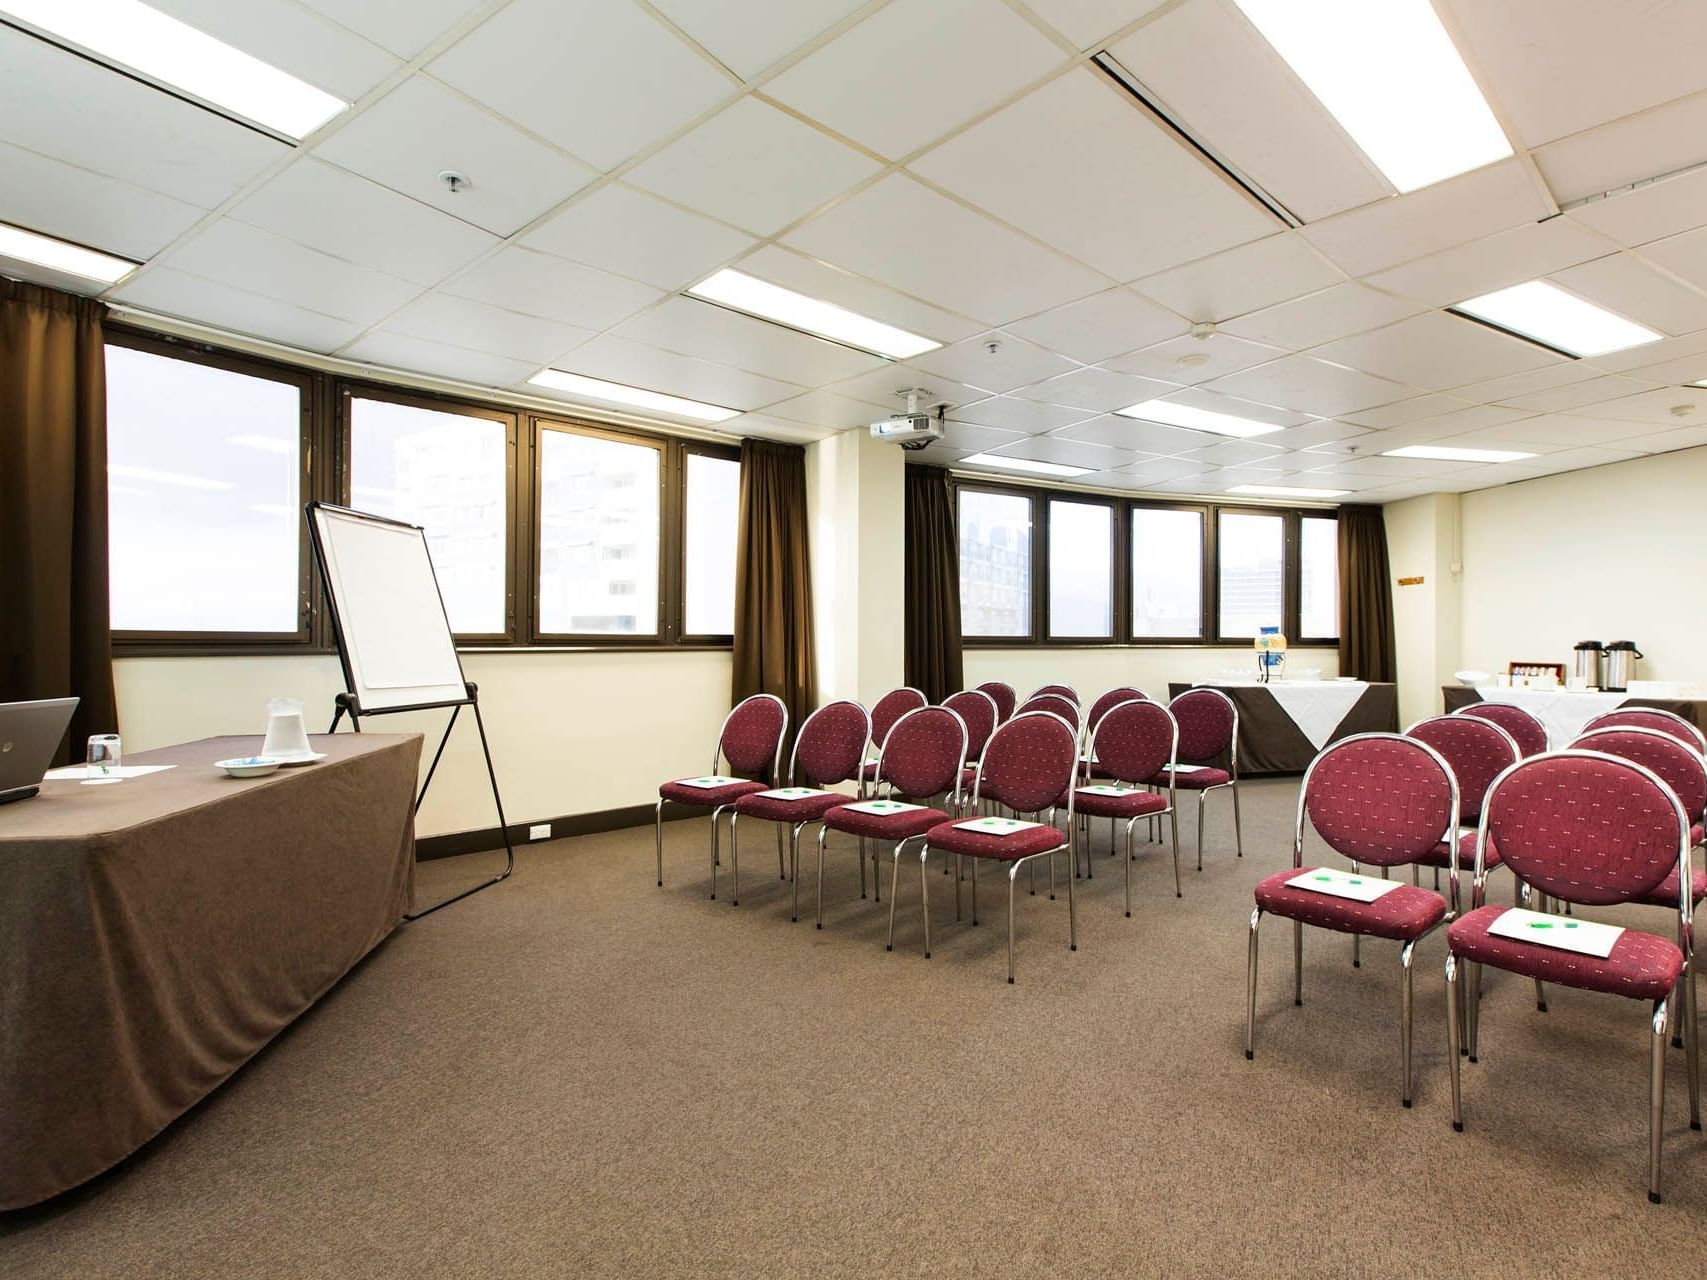 Classroom set-up in Victoria Bridge Meeting Room at Hotel Grand Chancellor Townsville